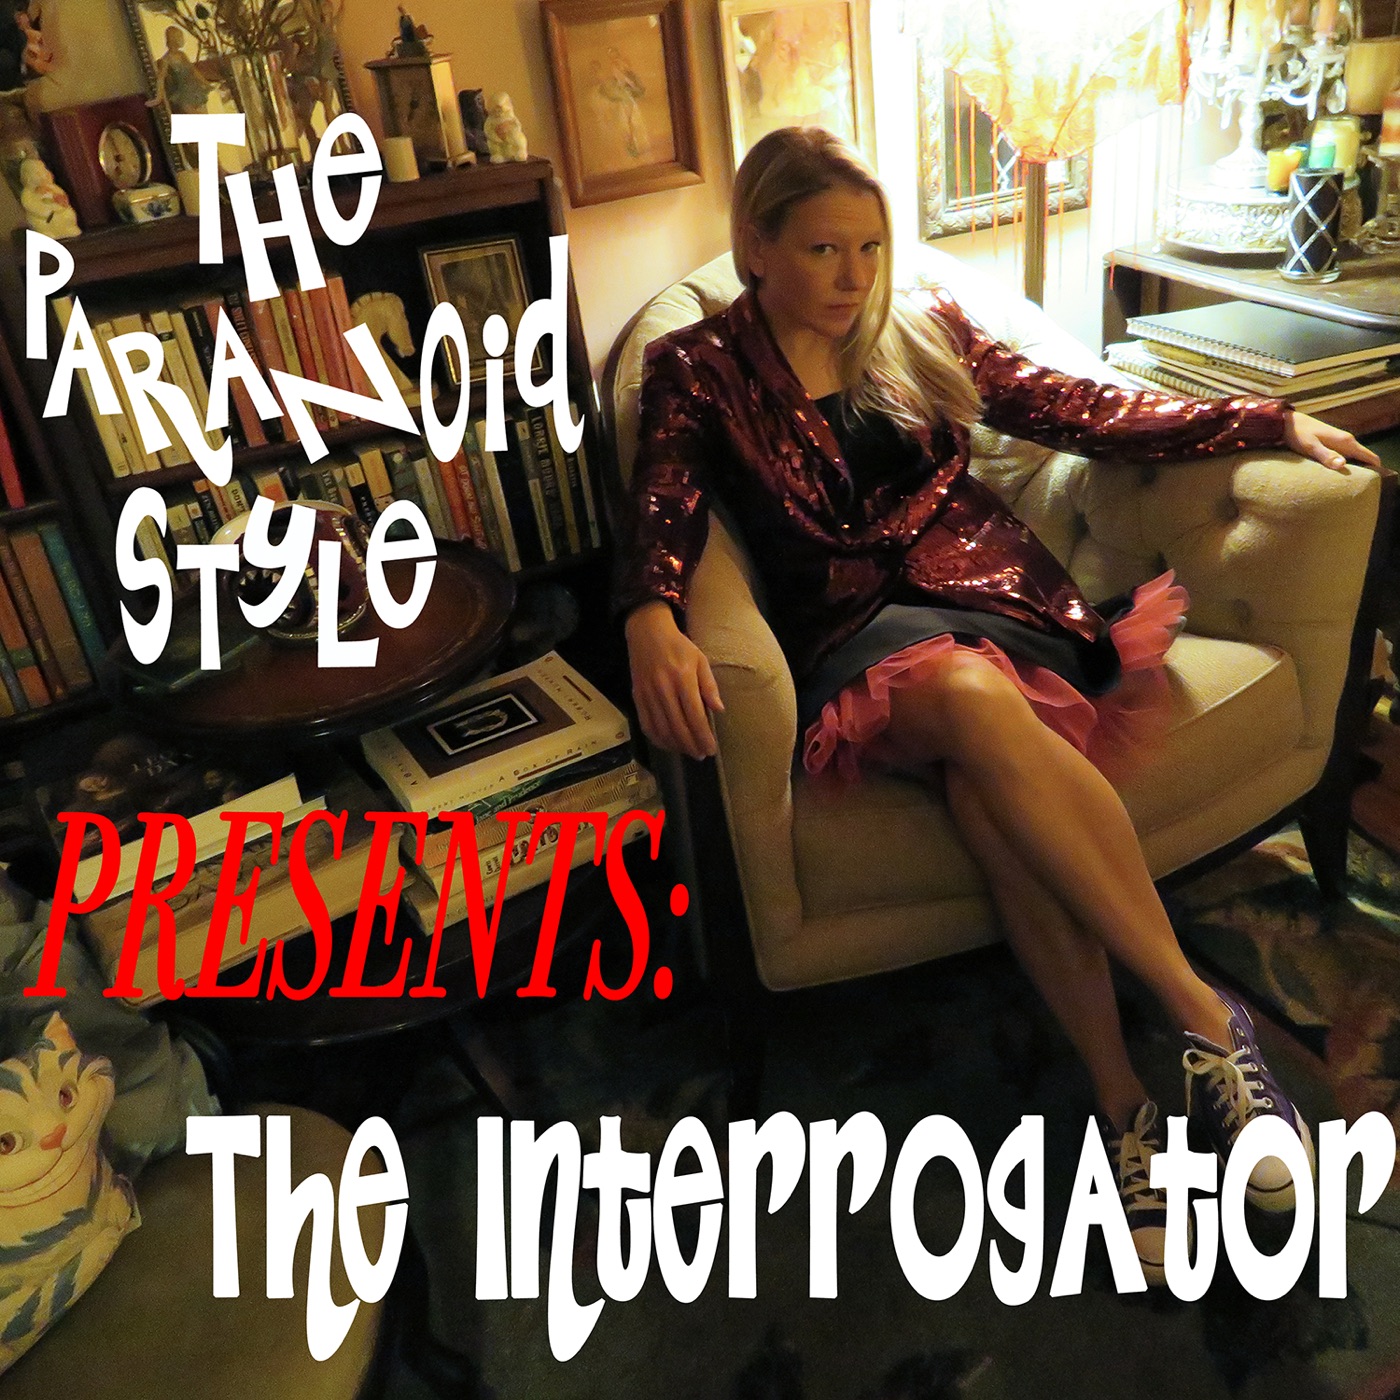 The Interrogator by The Paranoid Style